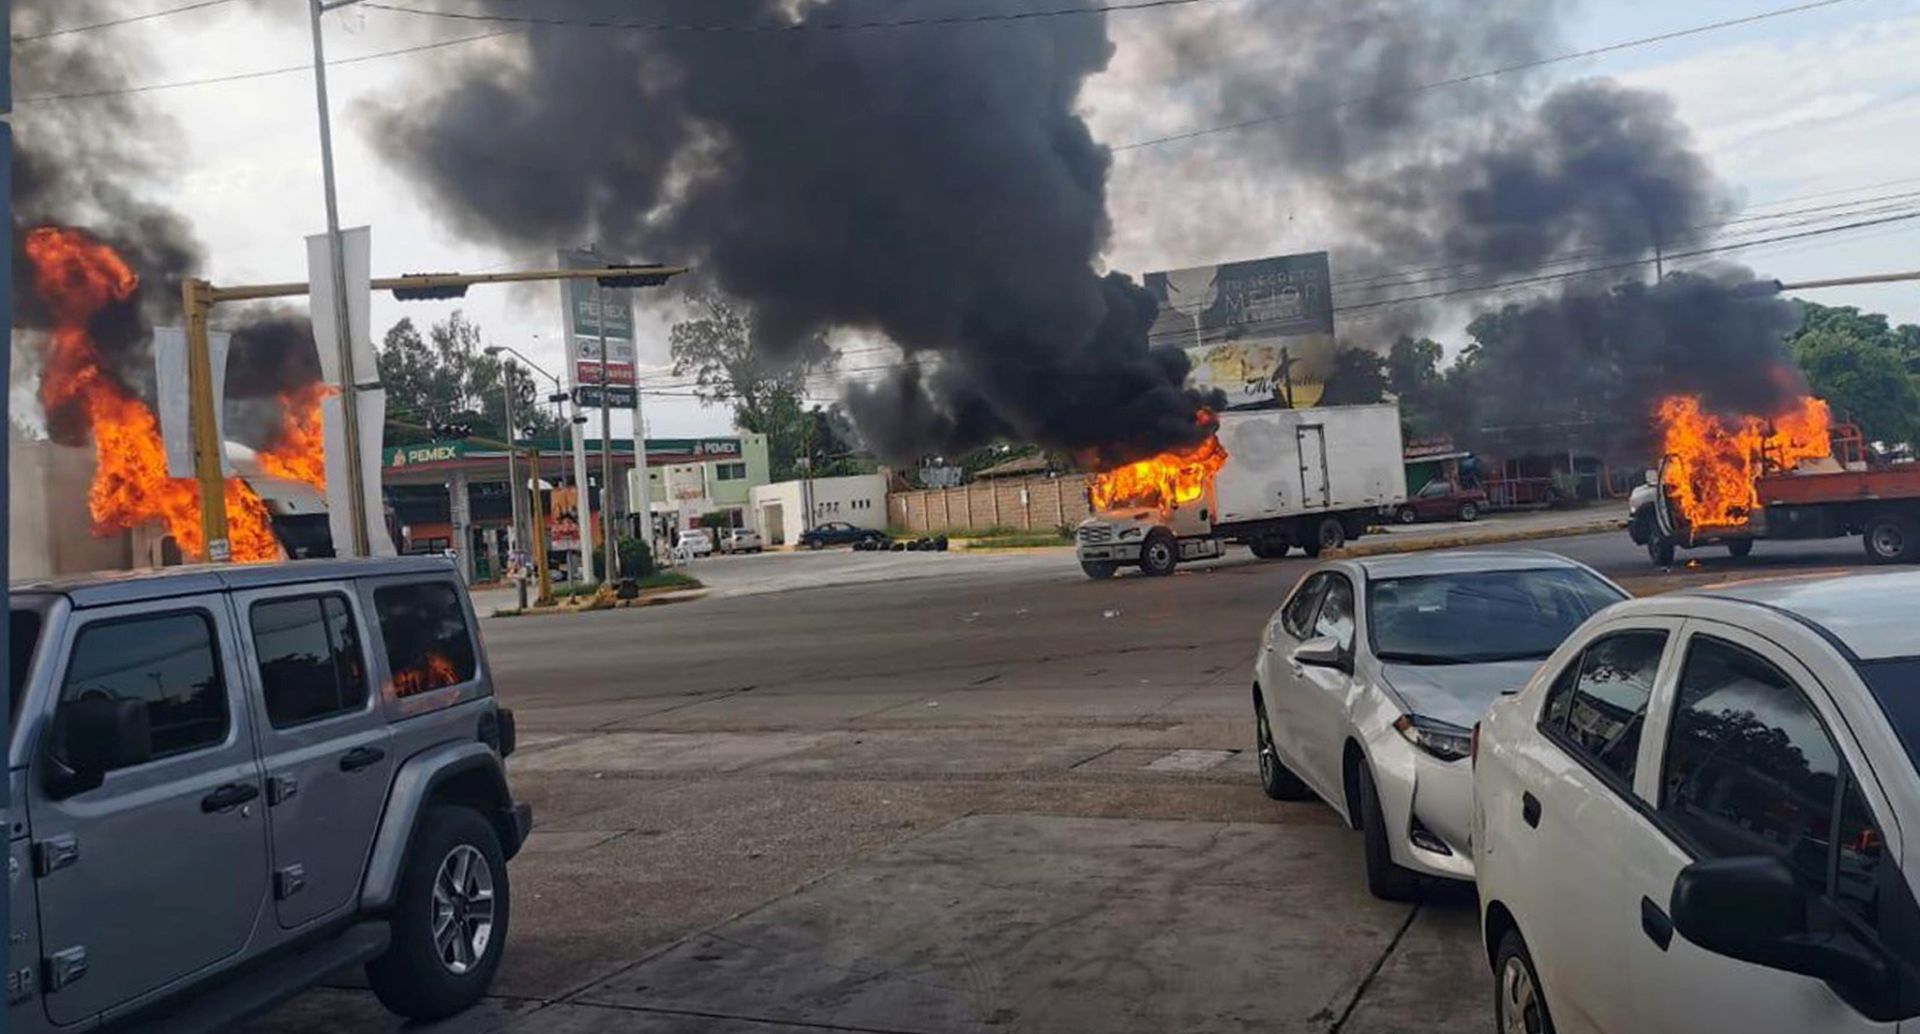 epaselect epa07928937 A view of vehicles on fire during a clash between armed gunmen and Federal police and military soldiers, in the streets of the city of Culiacan, Sinaloa state, Mexico, 17 October 2019. According to media reports, alleged drug cartel gunmen set up blockades and unleashed volleys of gunfire in the Mexican city of Culiacan amid rumors of the capture of Ovidio Guzman Lopez, son of imprisoned drug trafficker Joaquin 'El Chapo' Guzman Loera. The blockades set up by the gunmen, presumably from the Sinaloa drug cartel, extended to the exits of the city.  EPA/STR